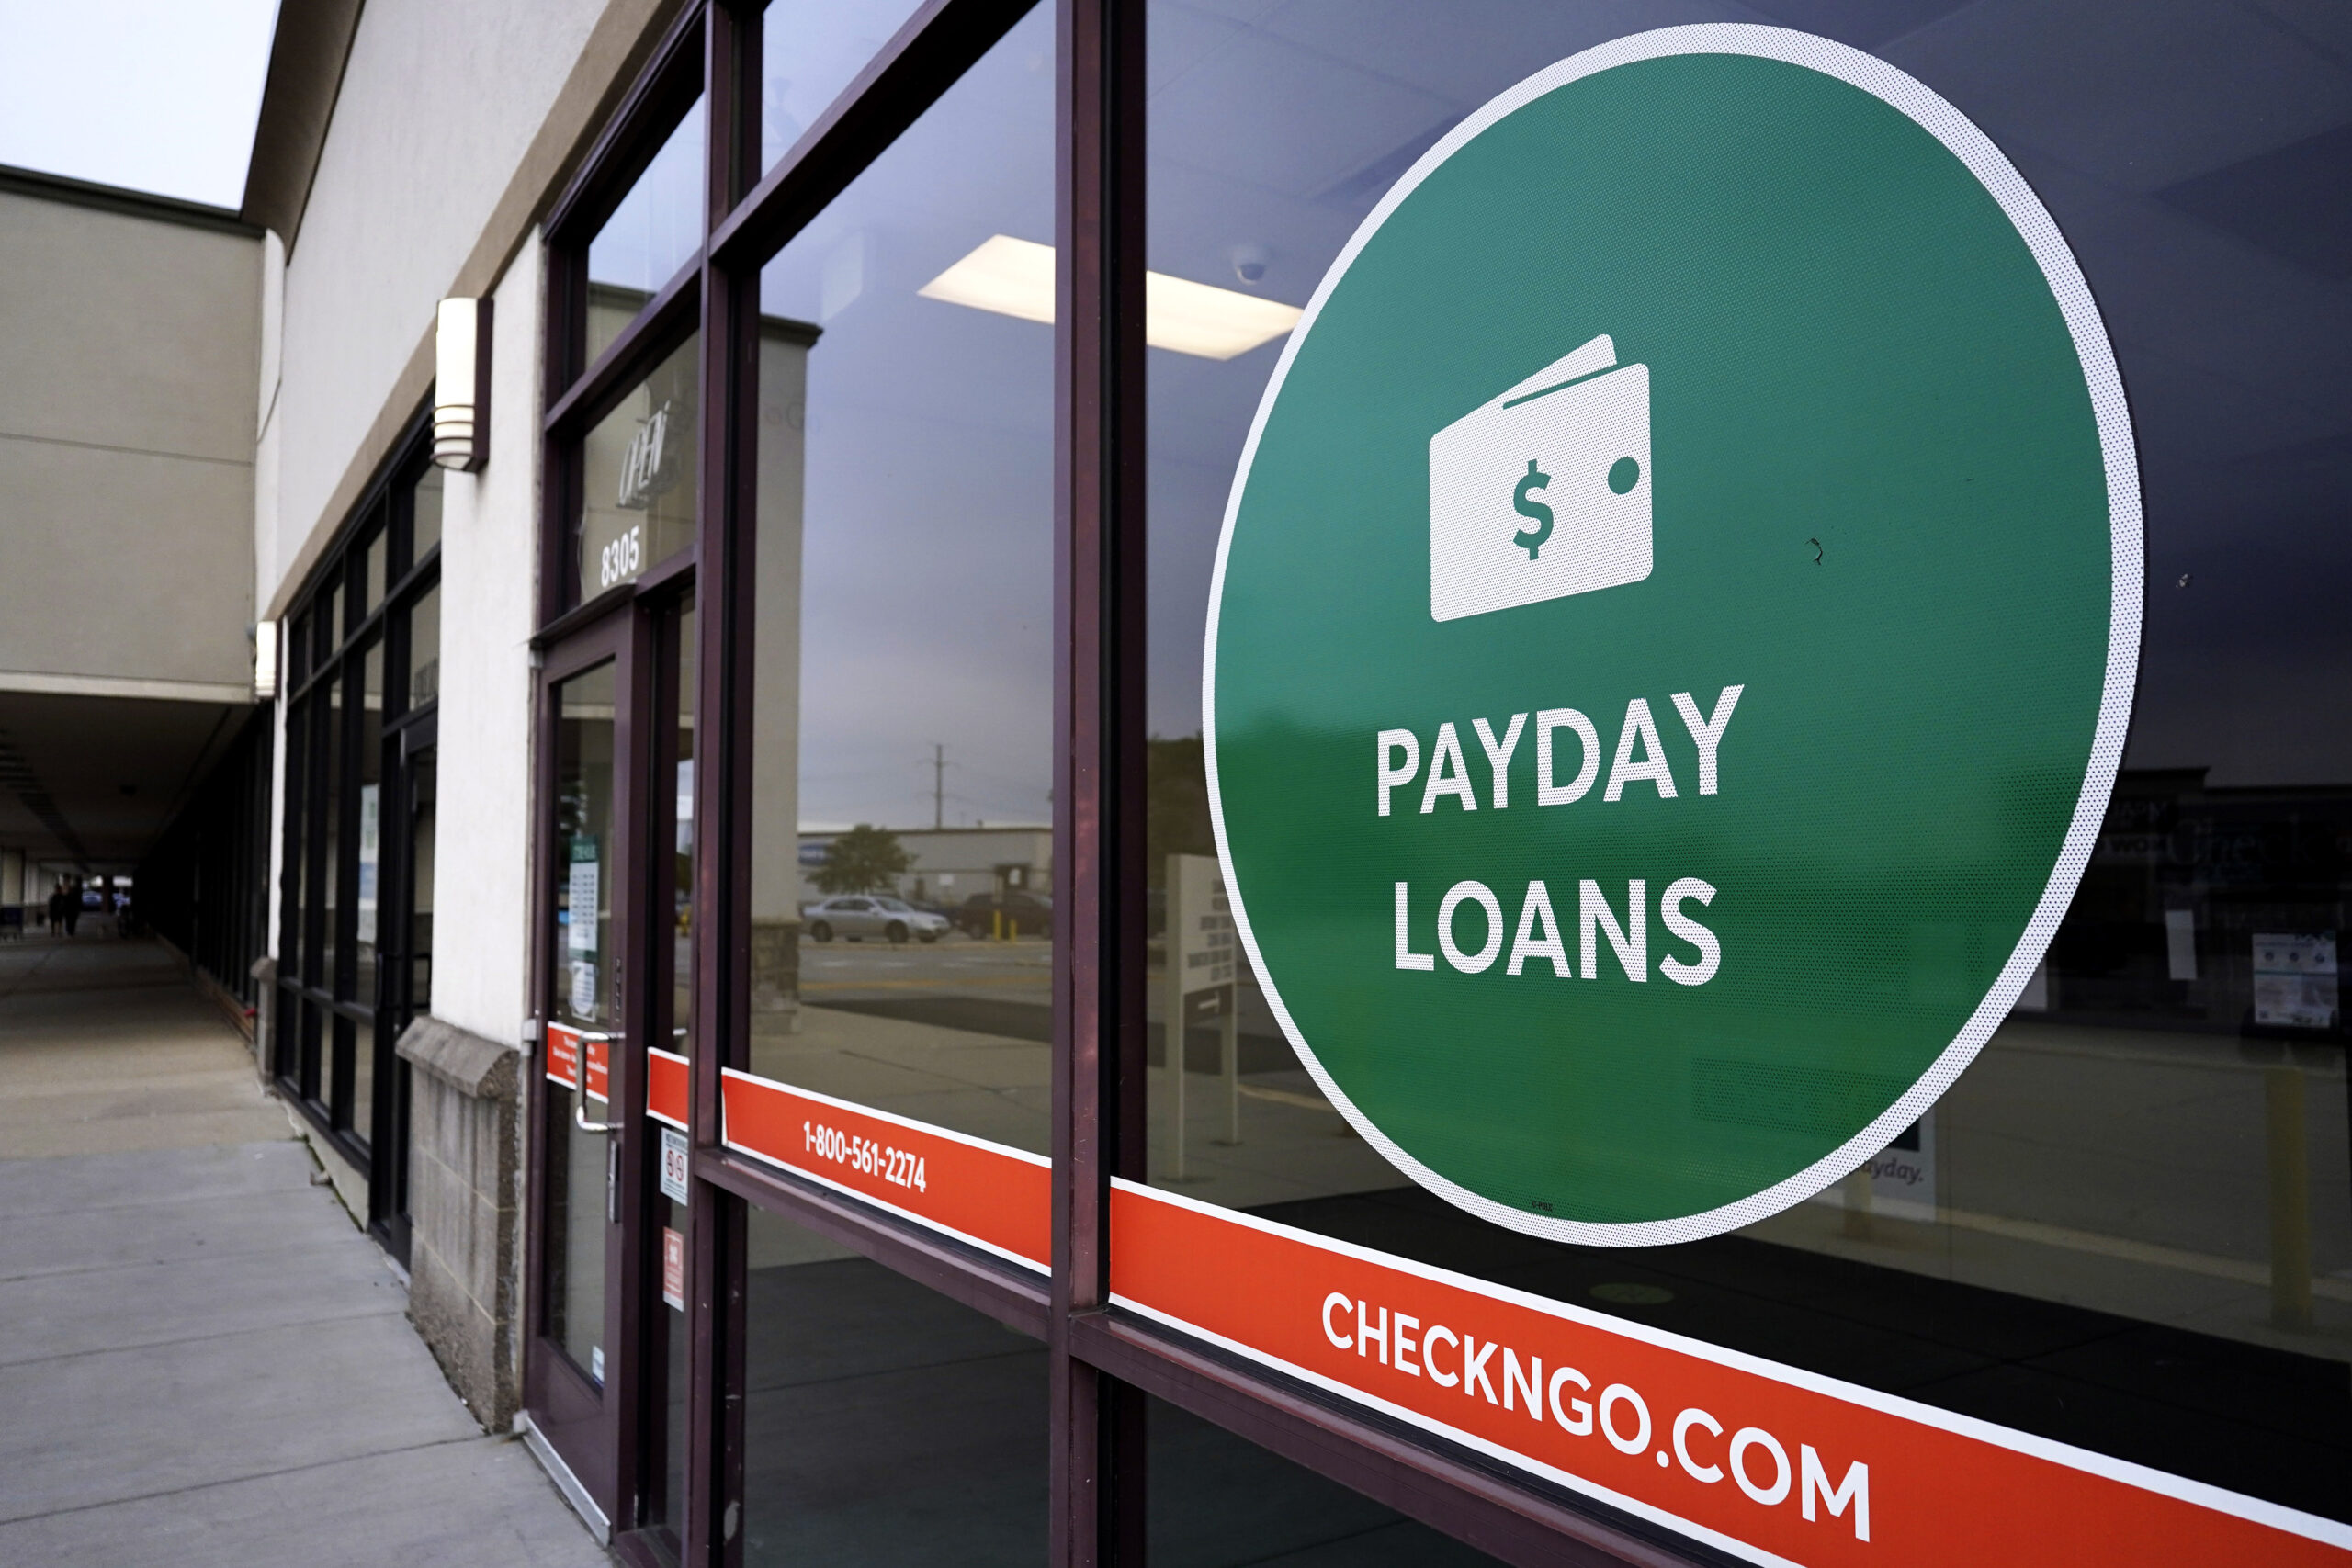 Bipartisan bills aim to reform payday loans in Wisconsin